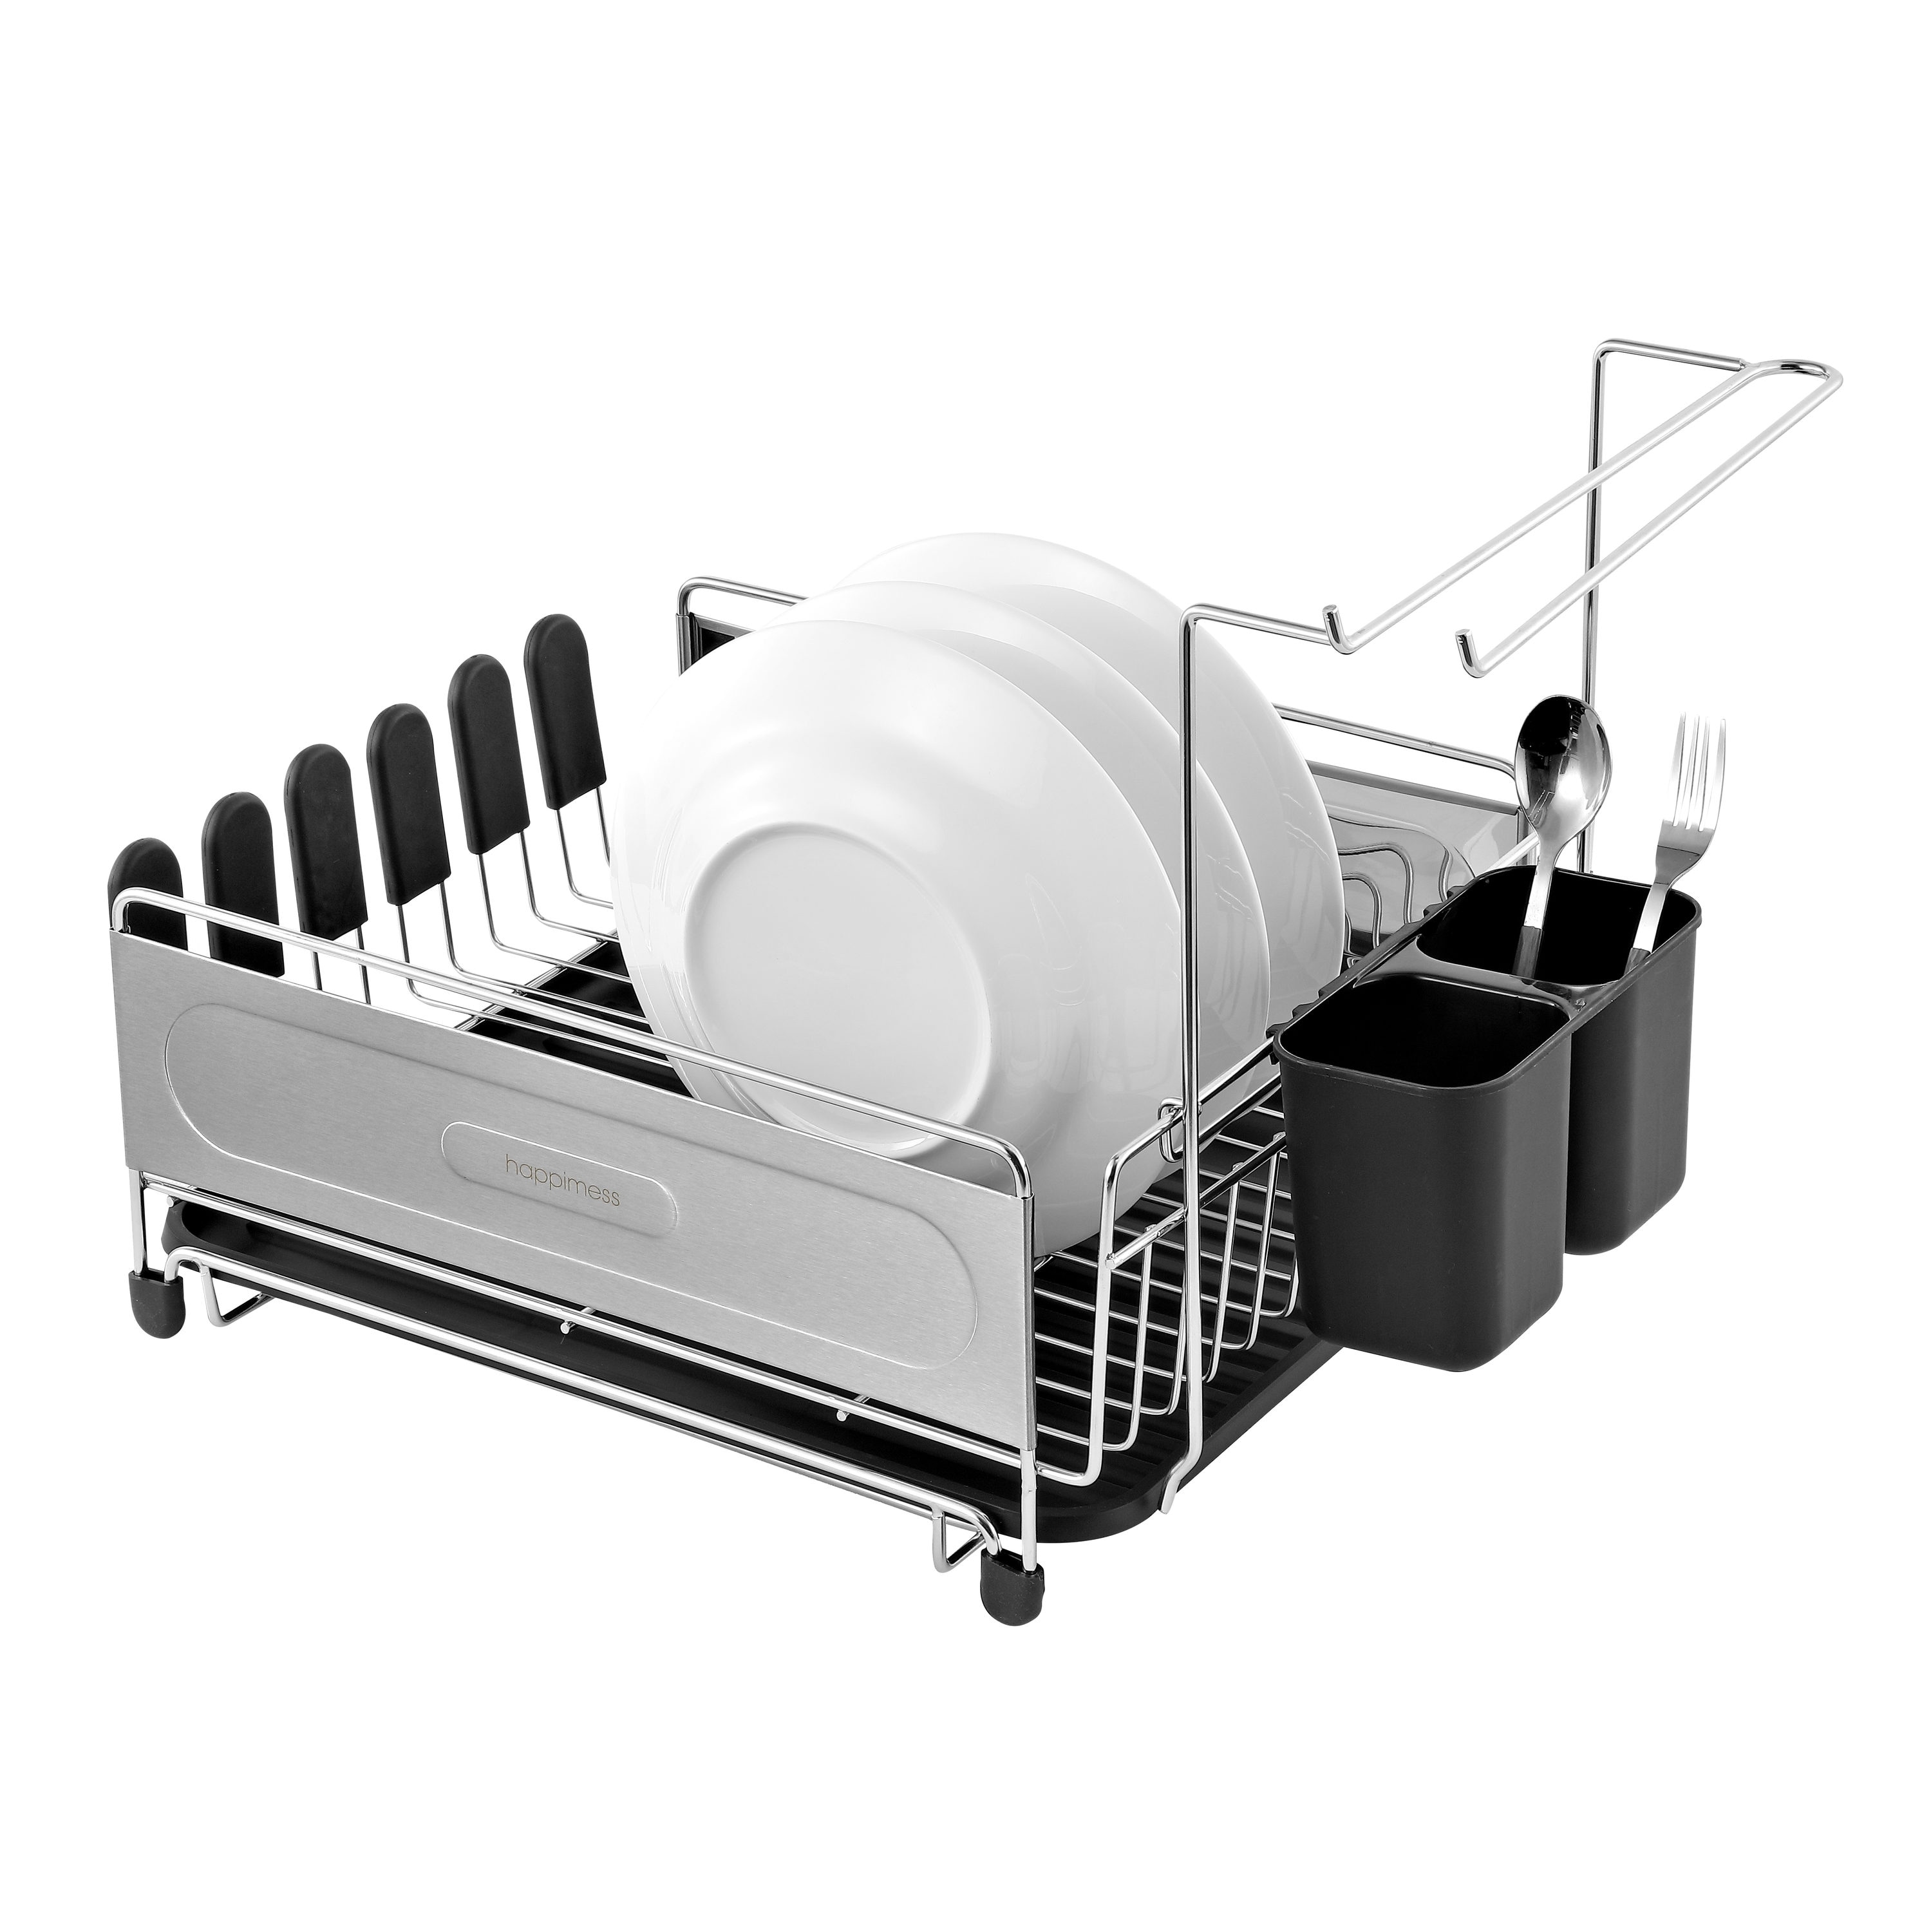 kekape Multifunctional Stainless Steel Dish Drying Rack with Pots and Pans  Storage Rack, Dish Drying Rack, Pots and Pans Storage Rack, Cup Rack